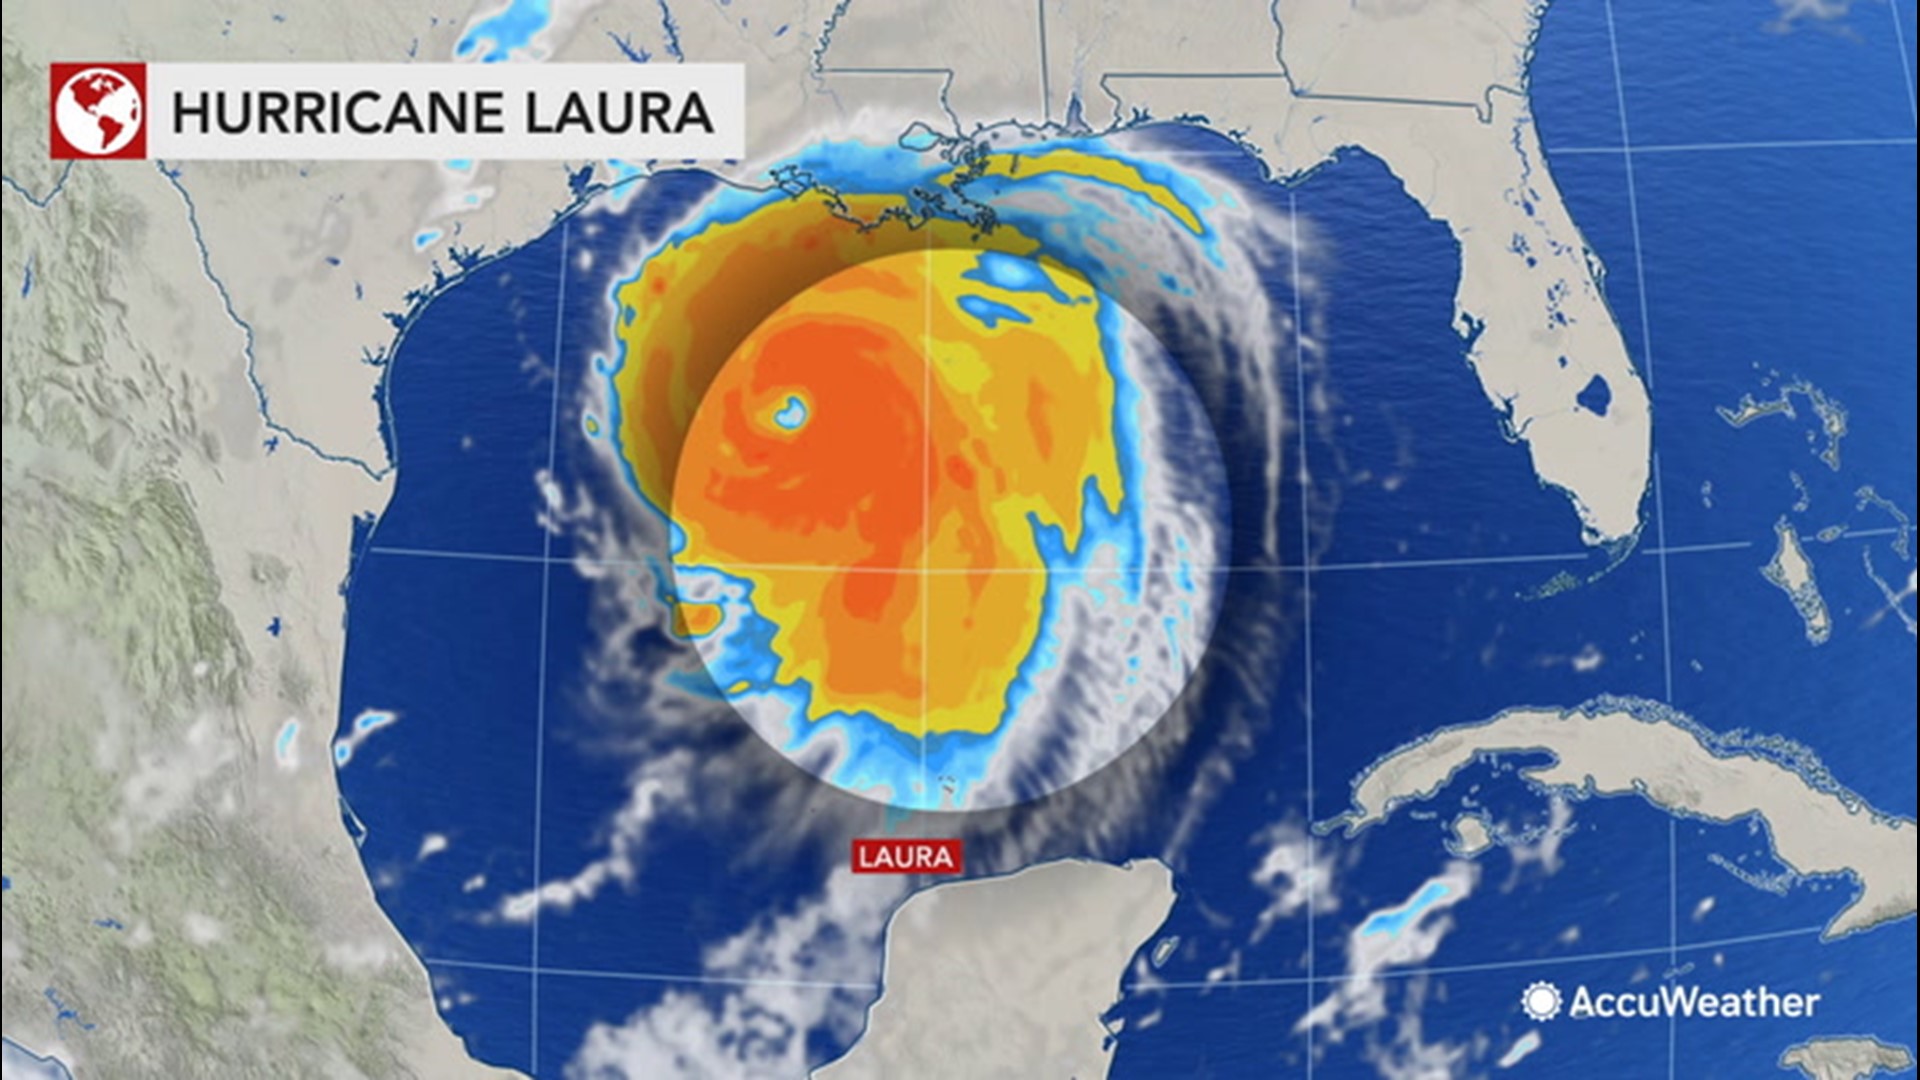 AccuWeather forecasts Cat-3 Hurricane Laura to make landfall as a major hurricane along the Texas/Louisiana border during the evening hours of Wednesday, August 26.